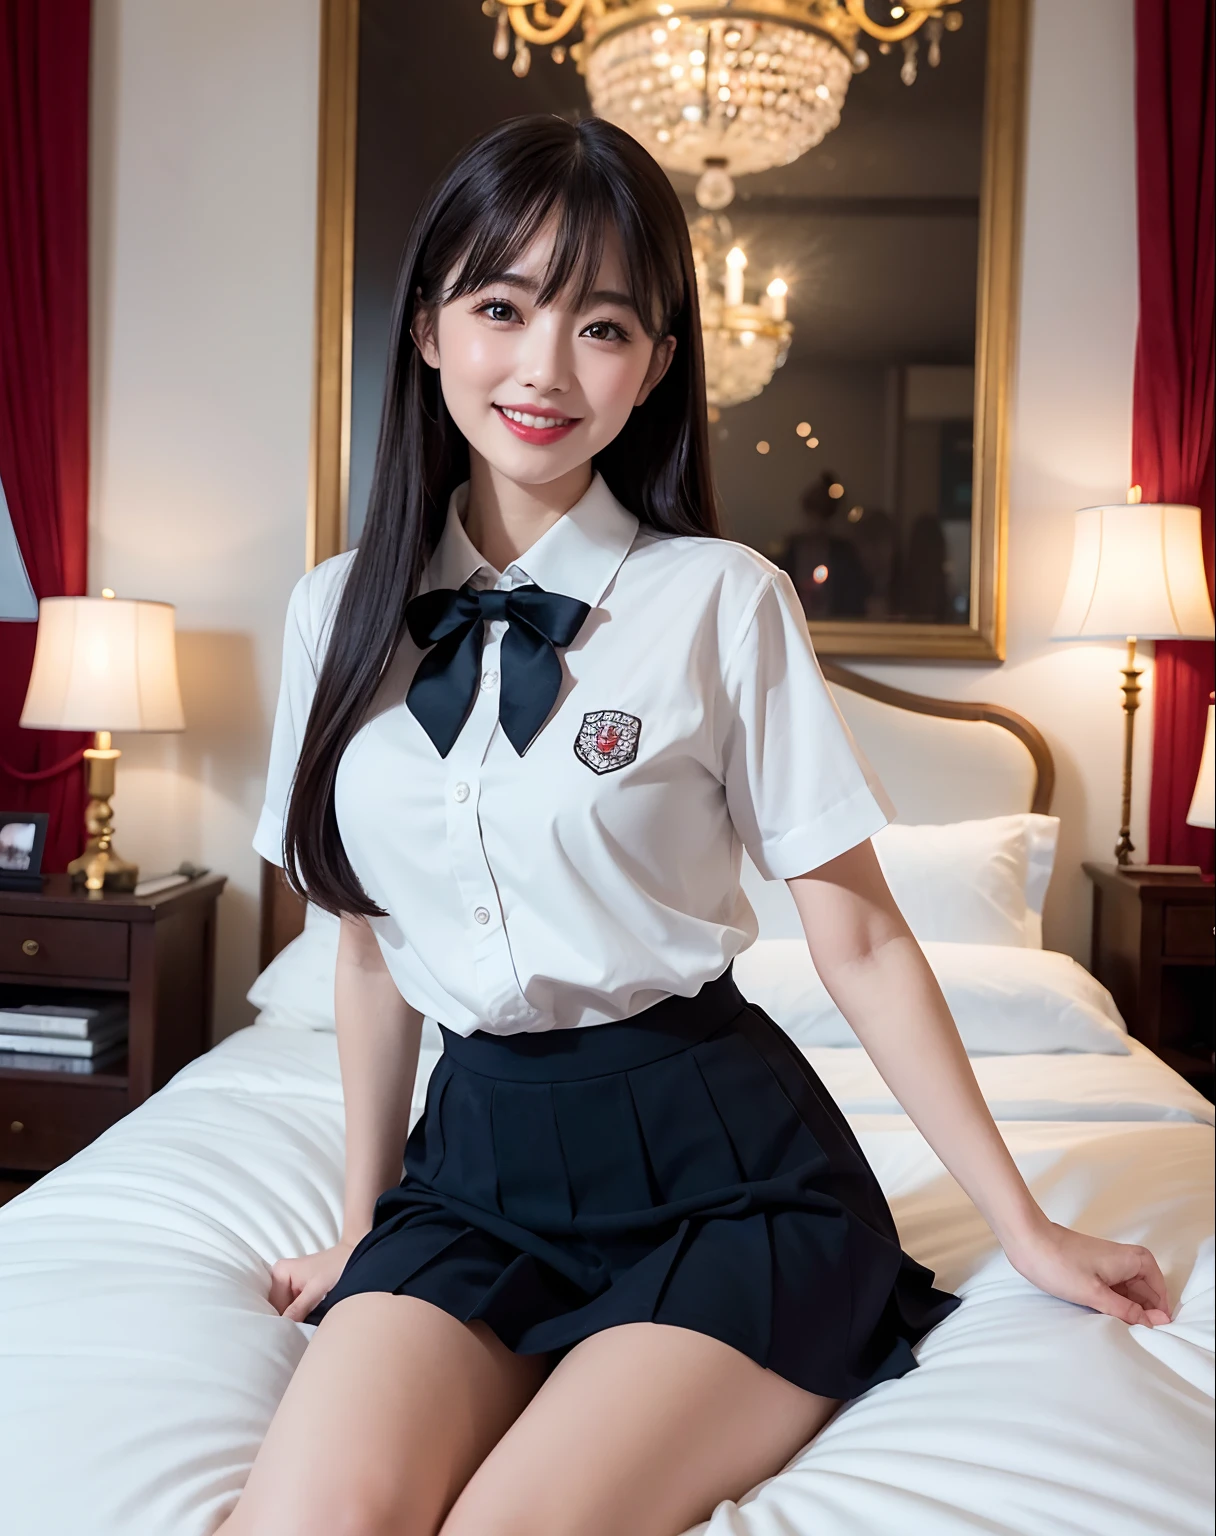 (Phenomenally cute schoolgirl、Japan Girl Uniform、Wearing Japan 、a hyperrealistic schoolgirl、Dressed as a schoolgirl、a hyperrealistic 、Realistic Schoolgirl、Girl in Uniform、Woman in Japan in dark blue short skirt and shirt and bow tie Goddess of Japan, Sexy Girl, Chest that looks like it's going to burst, Phenomenal cuteness)、(((Expensive VIP room in a gorgeous royal family,Princess Room,The most gorgeous room,White and gold room,White and gold background,White marble, Sit on a plush bed,Sit on a plush bed,Huge bed luxurious royal bedroom complete interior,Luxuriously furnished beds,Large room,Detailed chandelier,Luxury beyond imagination,Inside the Royal Palace, Room decorated with many ornaments, ornate decorations,Dazzling light, gorgeous decoration、Embroidered crimson velvet,Beautiful canopy、very elegant,High ceiling with crystal chandeliers suspended)))、((See the perfect camera here,Big smile,Clean teeth,perfect teeth,White teeth,finerly detailed face,Perfect fingers,Perfect hands,Accurate 5 fingers)), Pose、full body Esbian、View here,Center view、、Bold poses、Inviting eyes、Open crotch、panty visible、Nice skin、glistning skin、lovely thighs、glowing thigh、shining legs、bare-legged , High School in Japan 、Nogizaka Idol、Eyes that invite the highest quality，tmasterpiece，hight resolution，1girll，Beautiful expression，Red High Gloss Lipstick，Physical，dingdall effect，realisticlying，Dark Studio，edge lit，two tone lighting，（highdetailskin：1.2），8k Ultra HD， Digital SLR, softlighting, hightquality, volumettic light, Sneak Shots, photore, hight resolution